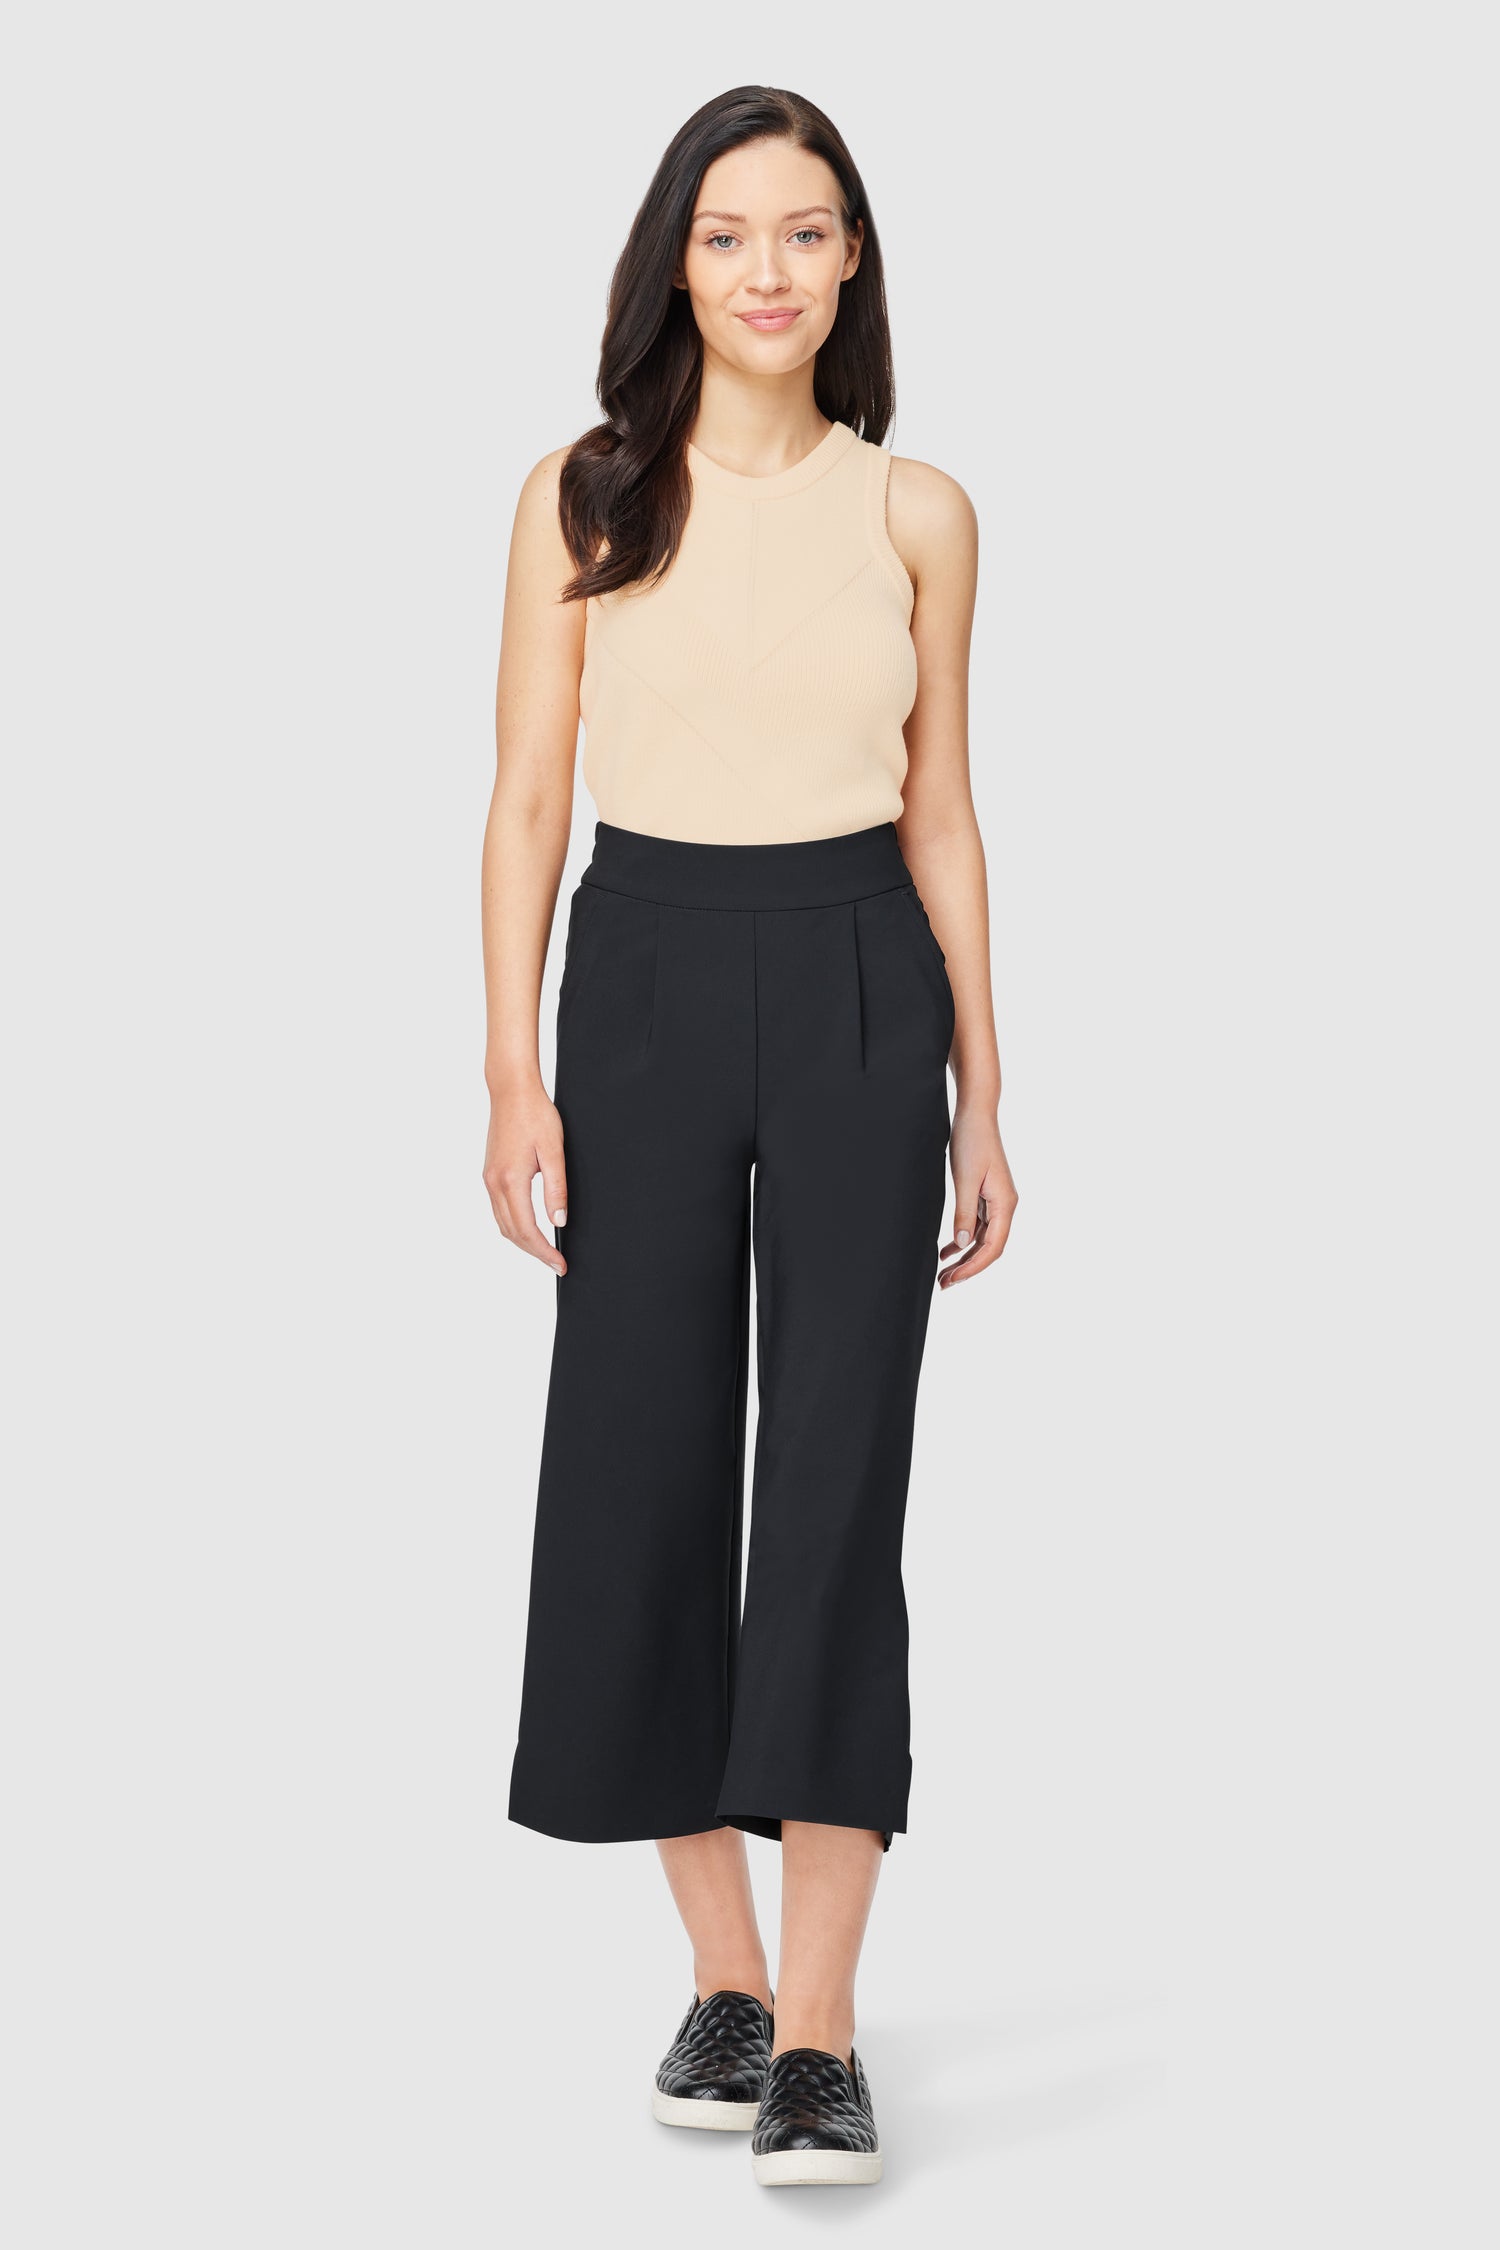 Friday FWD Women's Cropped Woven Pant - BEST SELLING